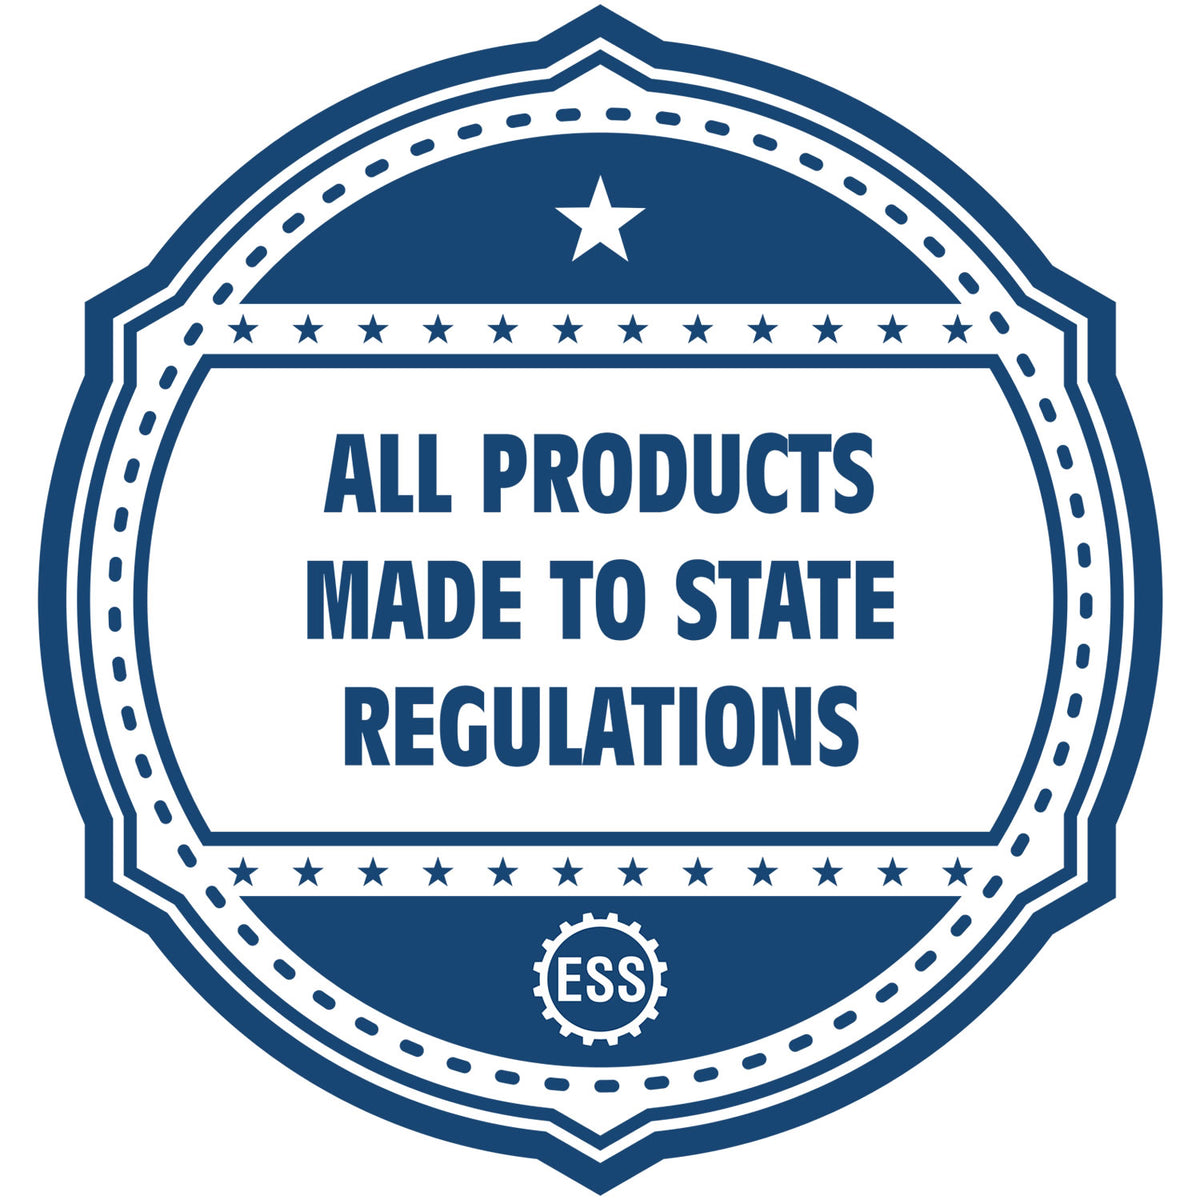 An icon or badge element for the Slim Pre-Inked Idaho Landscape Architect Seal Stamp showing that this product is made in compliance with state regulations.